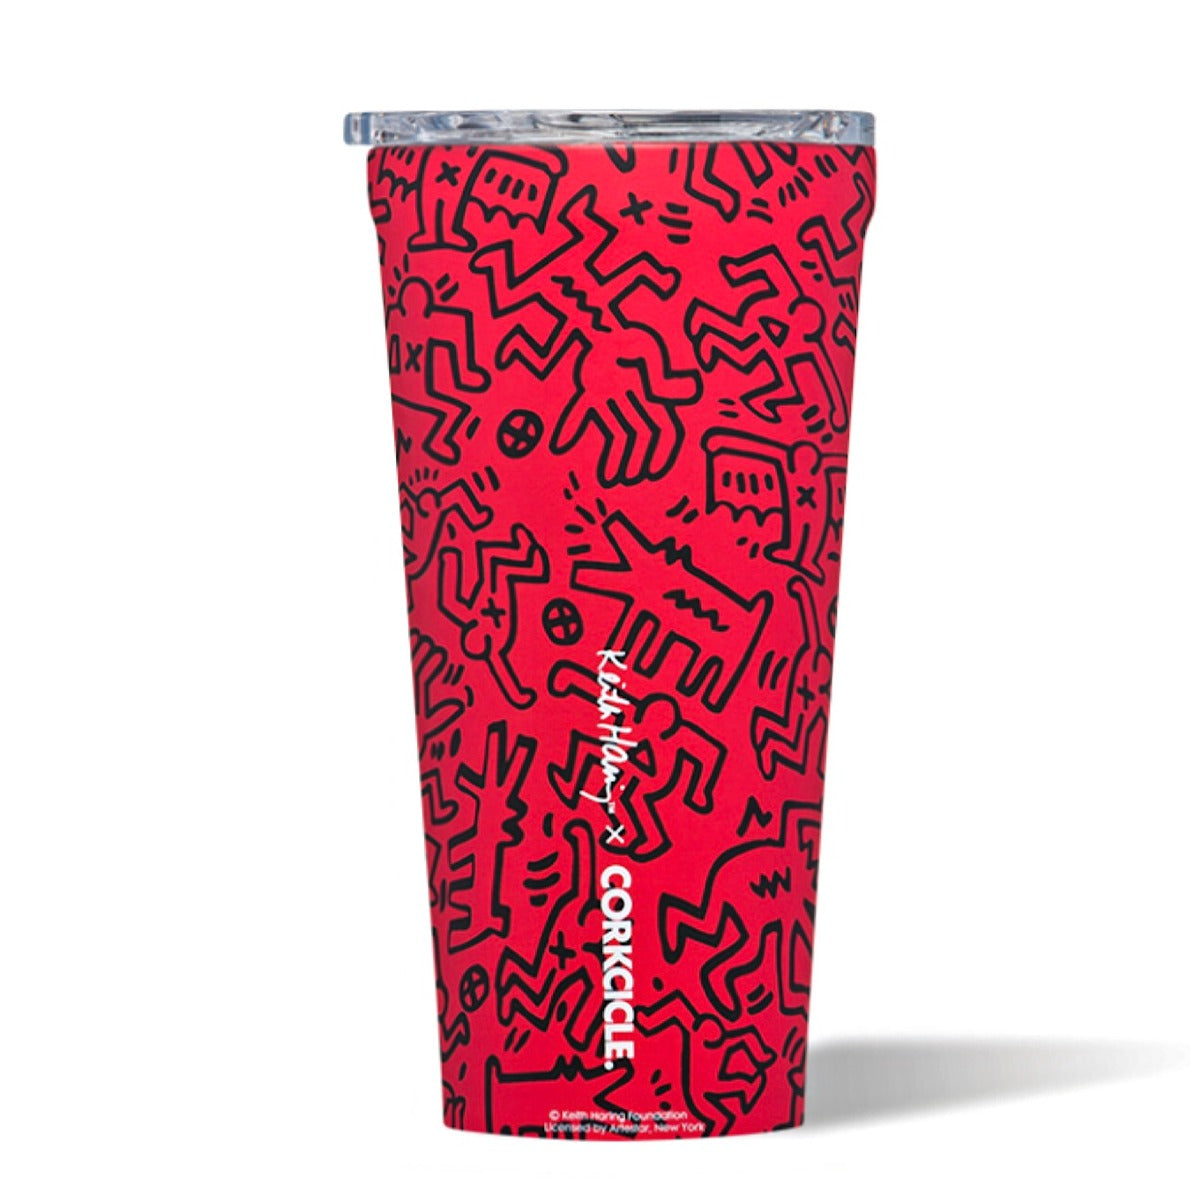 CORKCICLE x KEITH HARING | Stainless Steel Insulated Tumbler 16oz (475ml) - Street Art